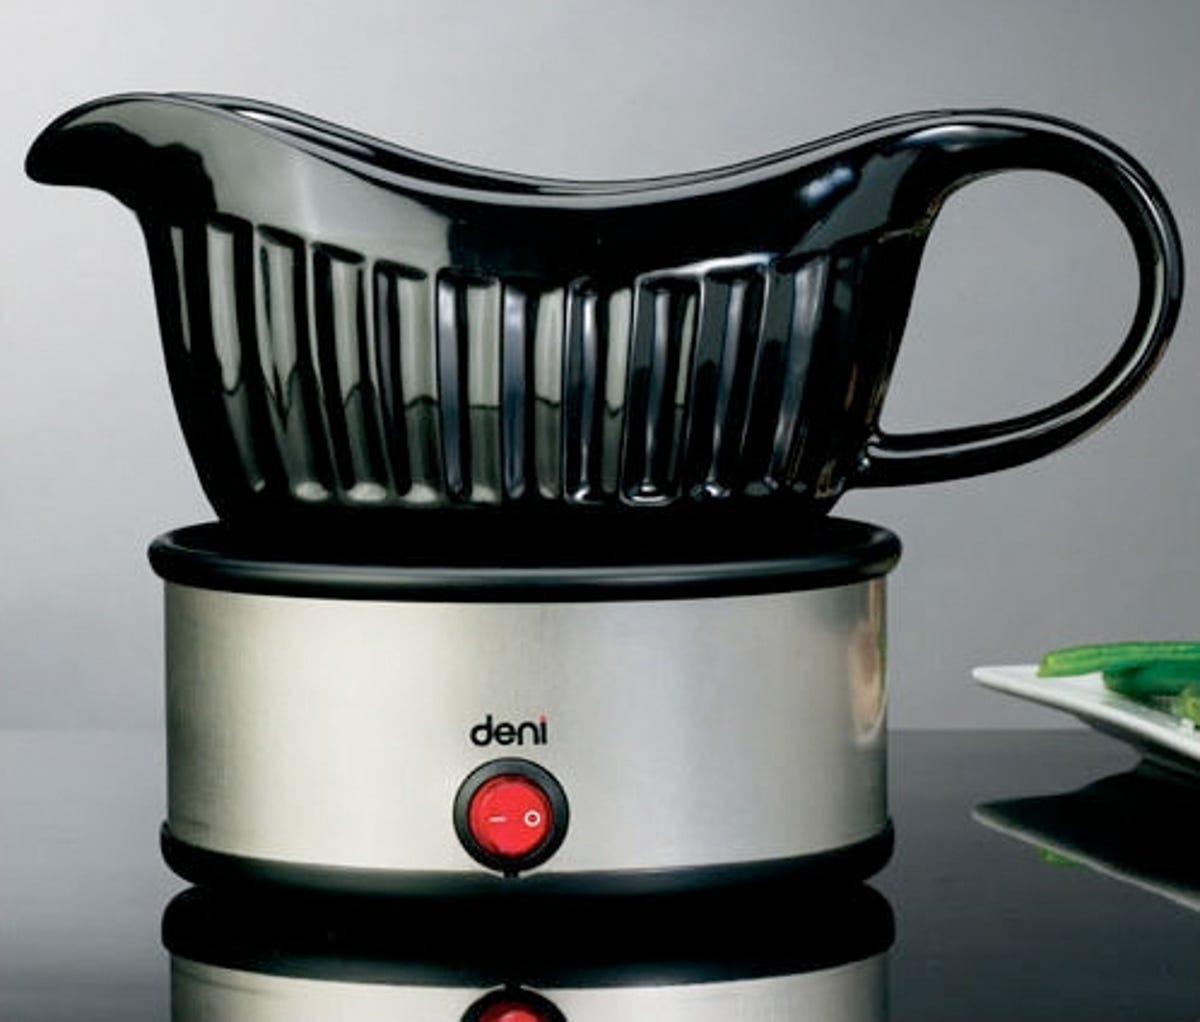 The gravy on top: the Deni Gravy Boat and Warmer can be used for more than just gravy.